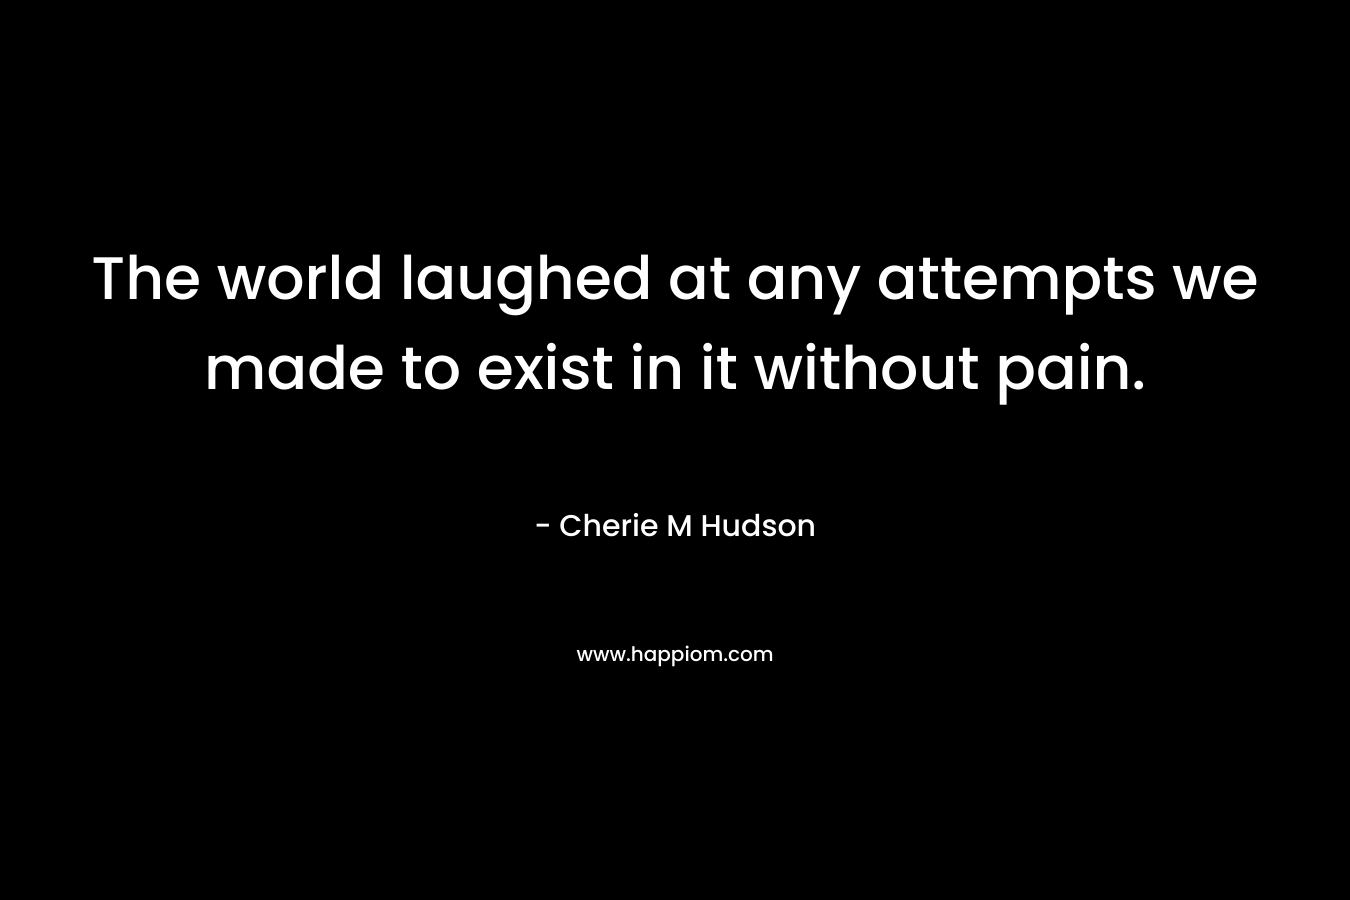 The world laughed at any attempts we made to exist in it without pain. – Cherie M Hudson